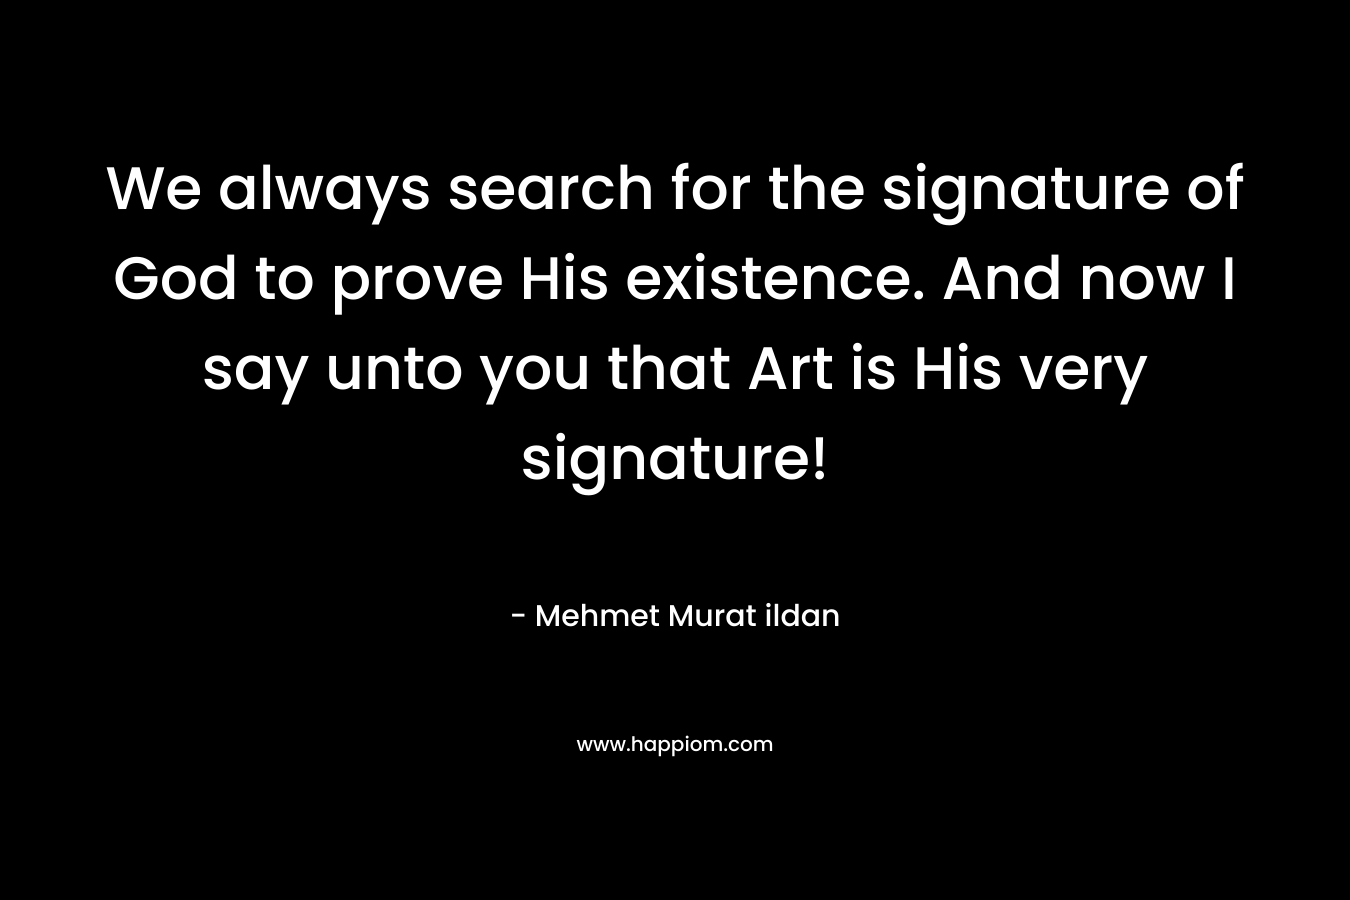 We always search for the signature of God to prove His existence. And now I say unto you that Art is His very signature!